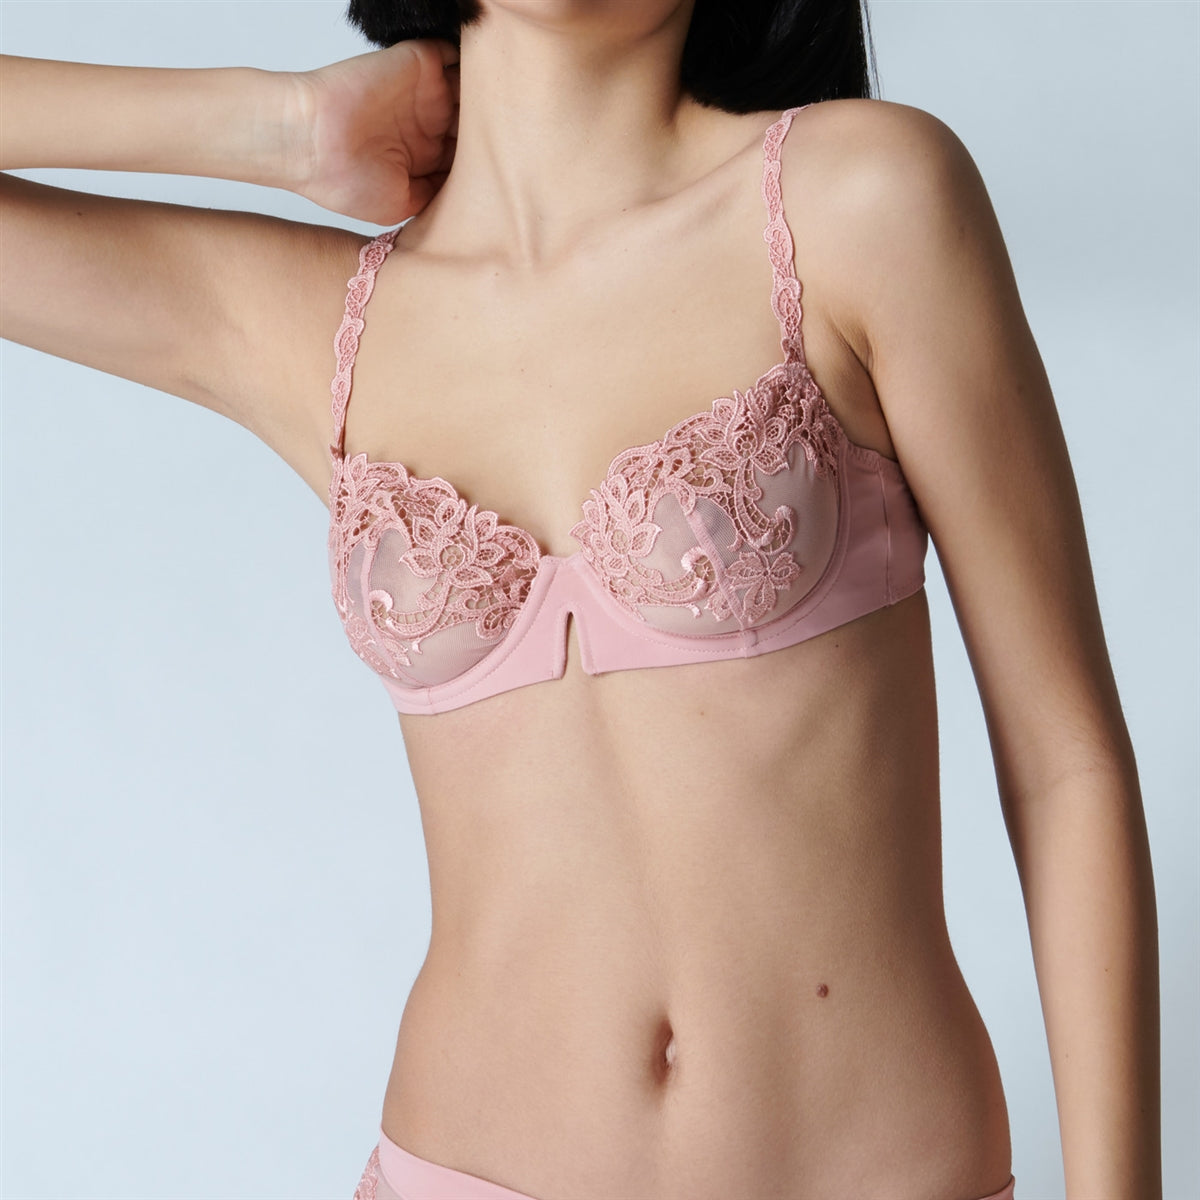 Stunning sheer half cup bra in a gorgeous pink colour with lace and embroidery detail tulle cups